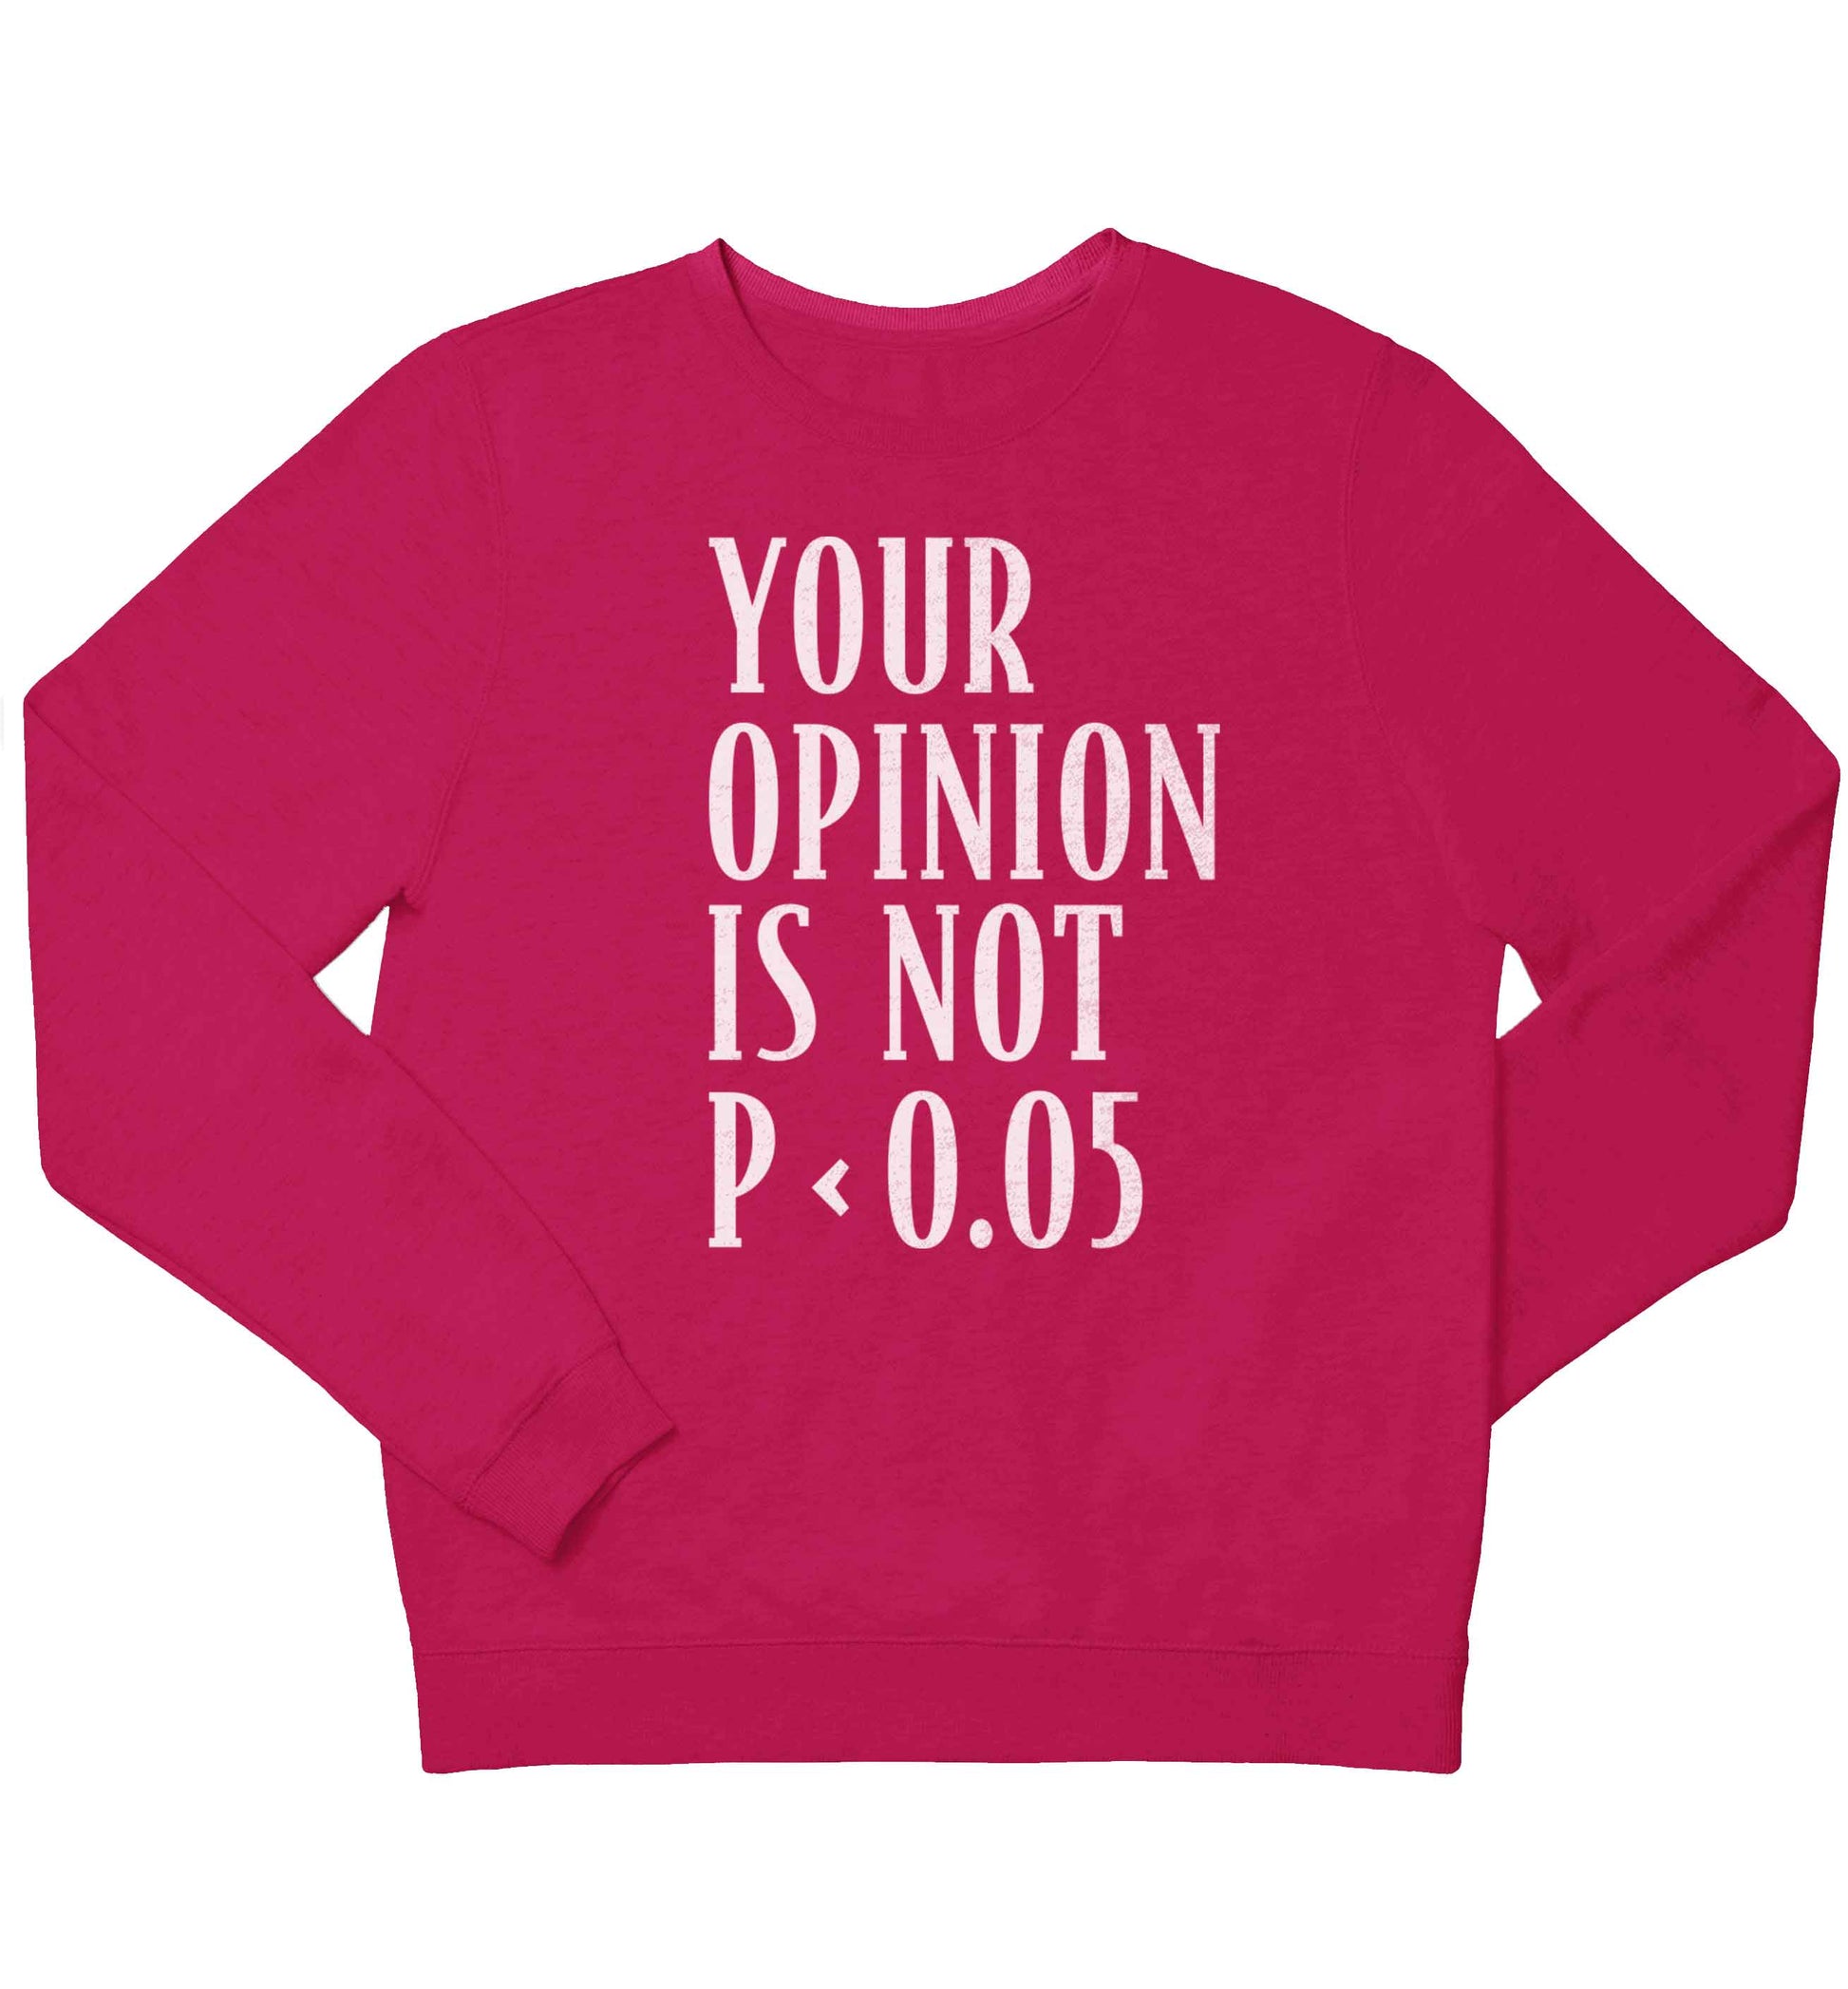 Your opinion is not P < 0.05children's pink sweater 12-13 Years